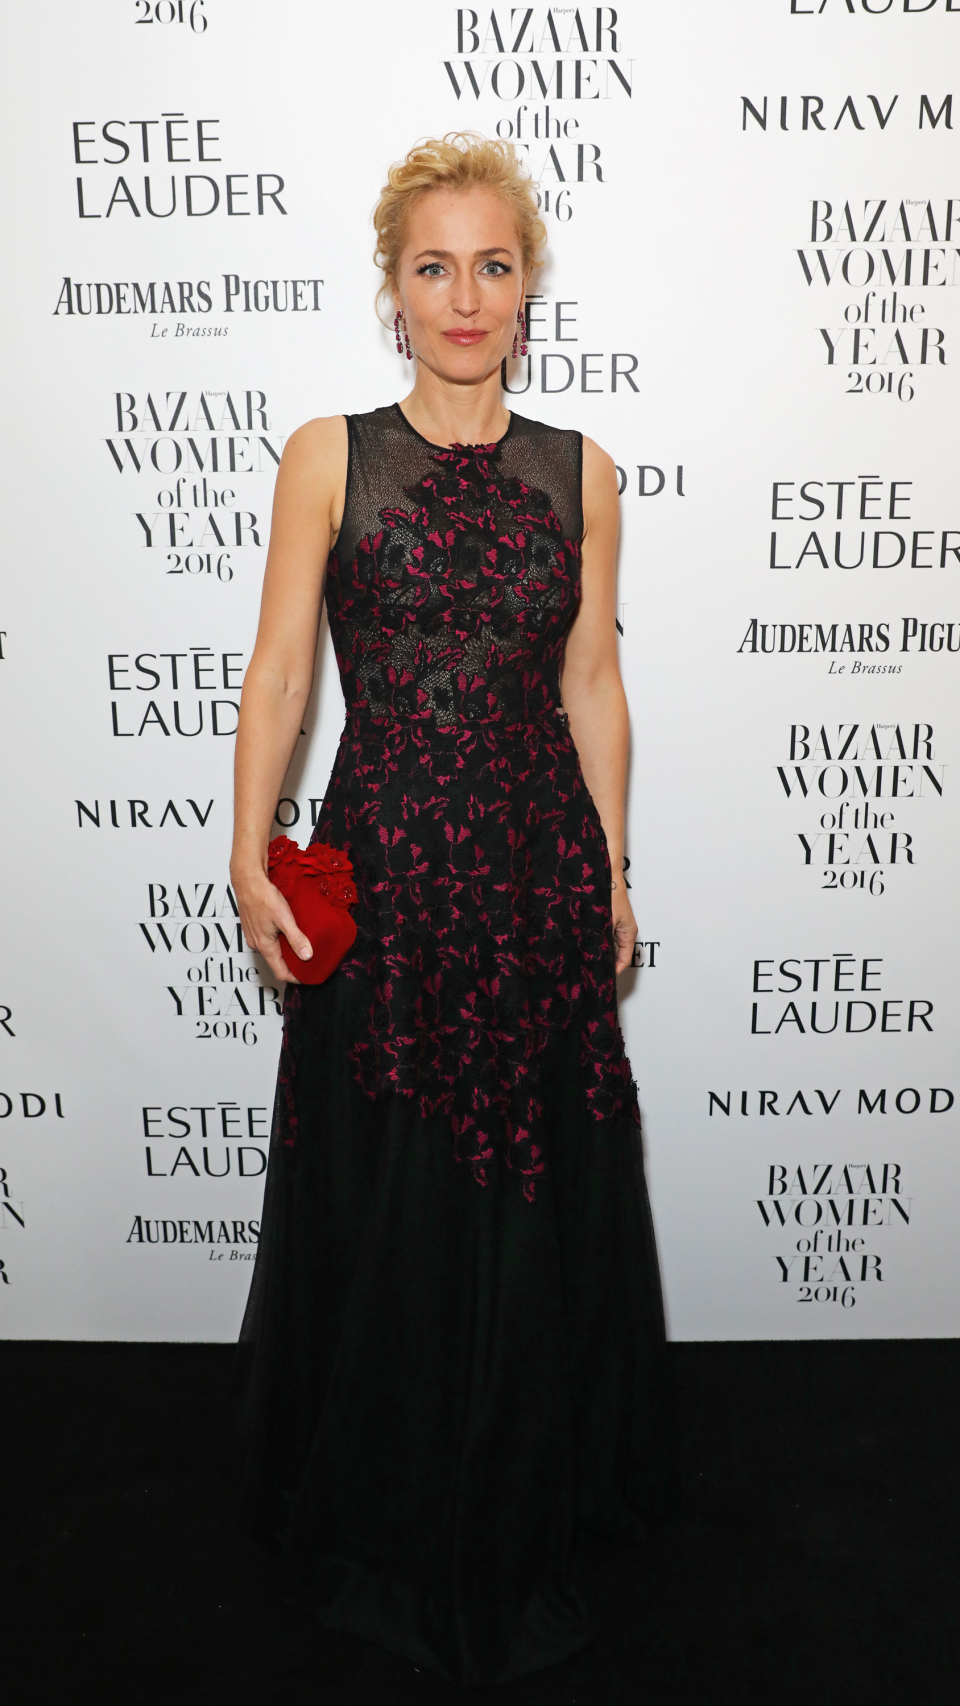 <p> At the Harper's Bazaar Women Of The Year Awards in London in 2016, Anderson looked the epitome of chic. The actress dazzled in a black gown by Sophia Kah, which featured intricate red embroidered detailing. She accessorised with red statement earrings and a matching clutch. </p>